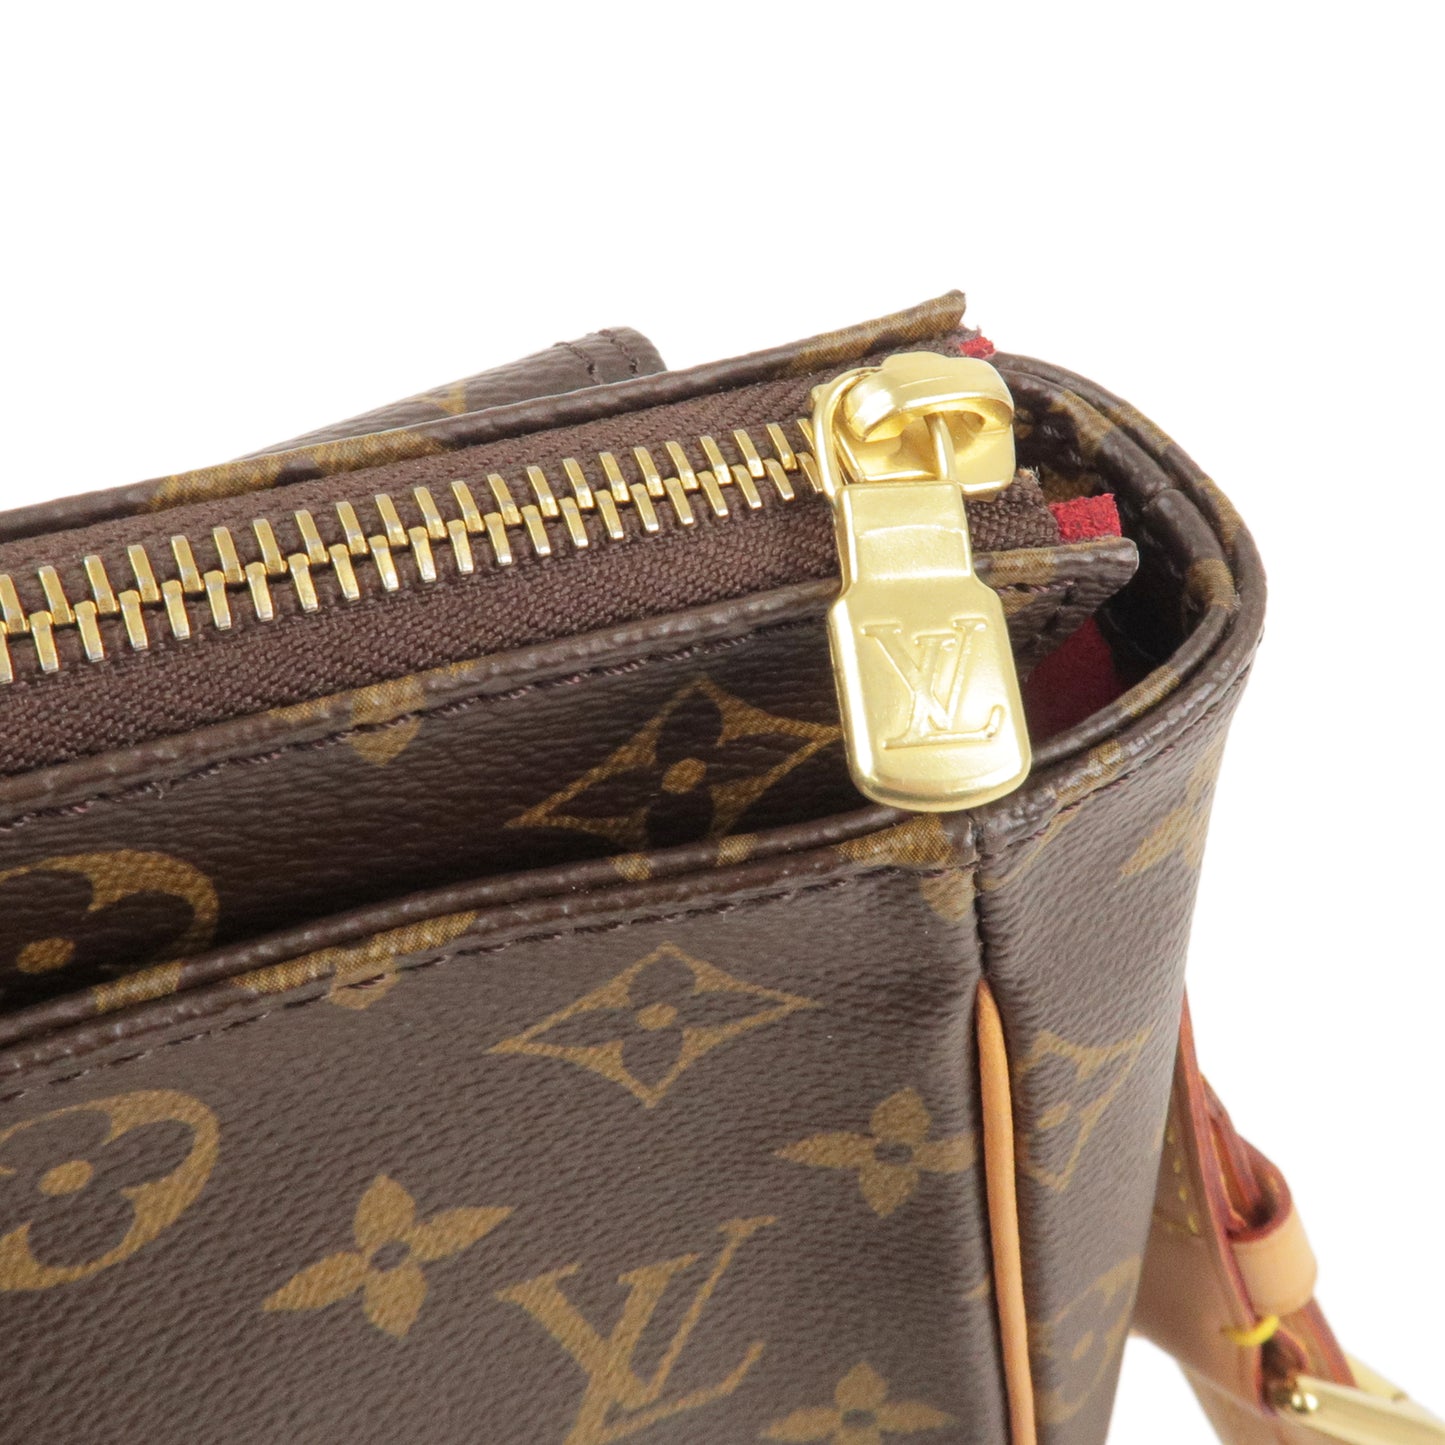 Buy [Used] Louis Vuitton Monogram Vibasite GM One Shoulder Bag Shoulder Bag  M51163 Brown PVC Bag M51163 from Japan - Buy authentic Plus exclusive items  from Japan